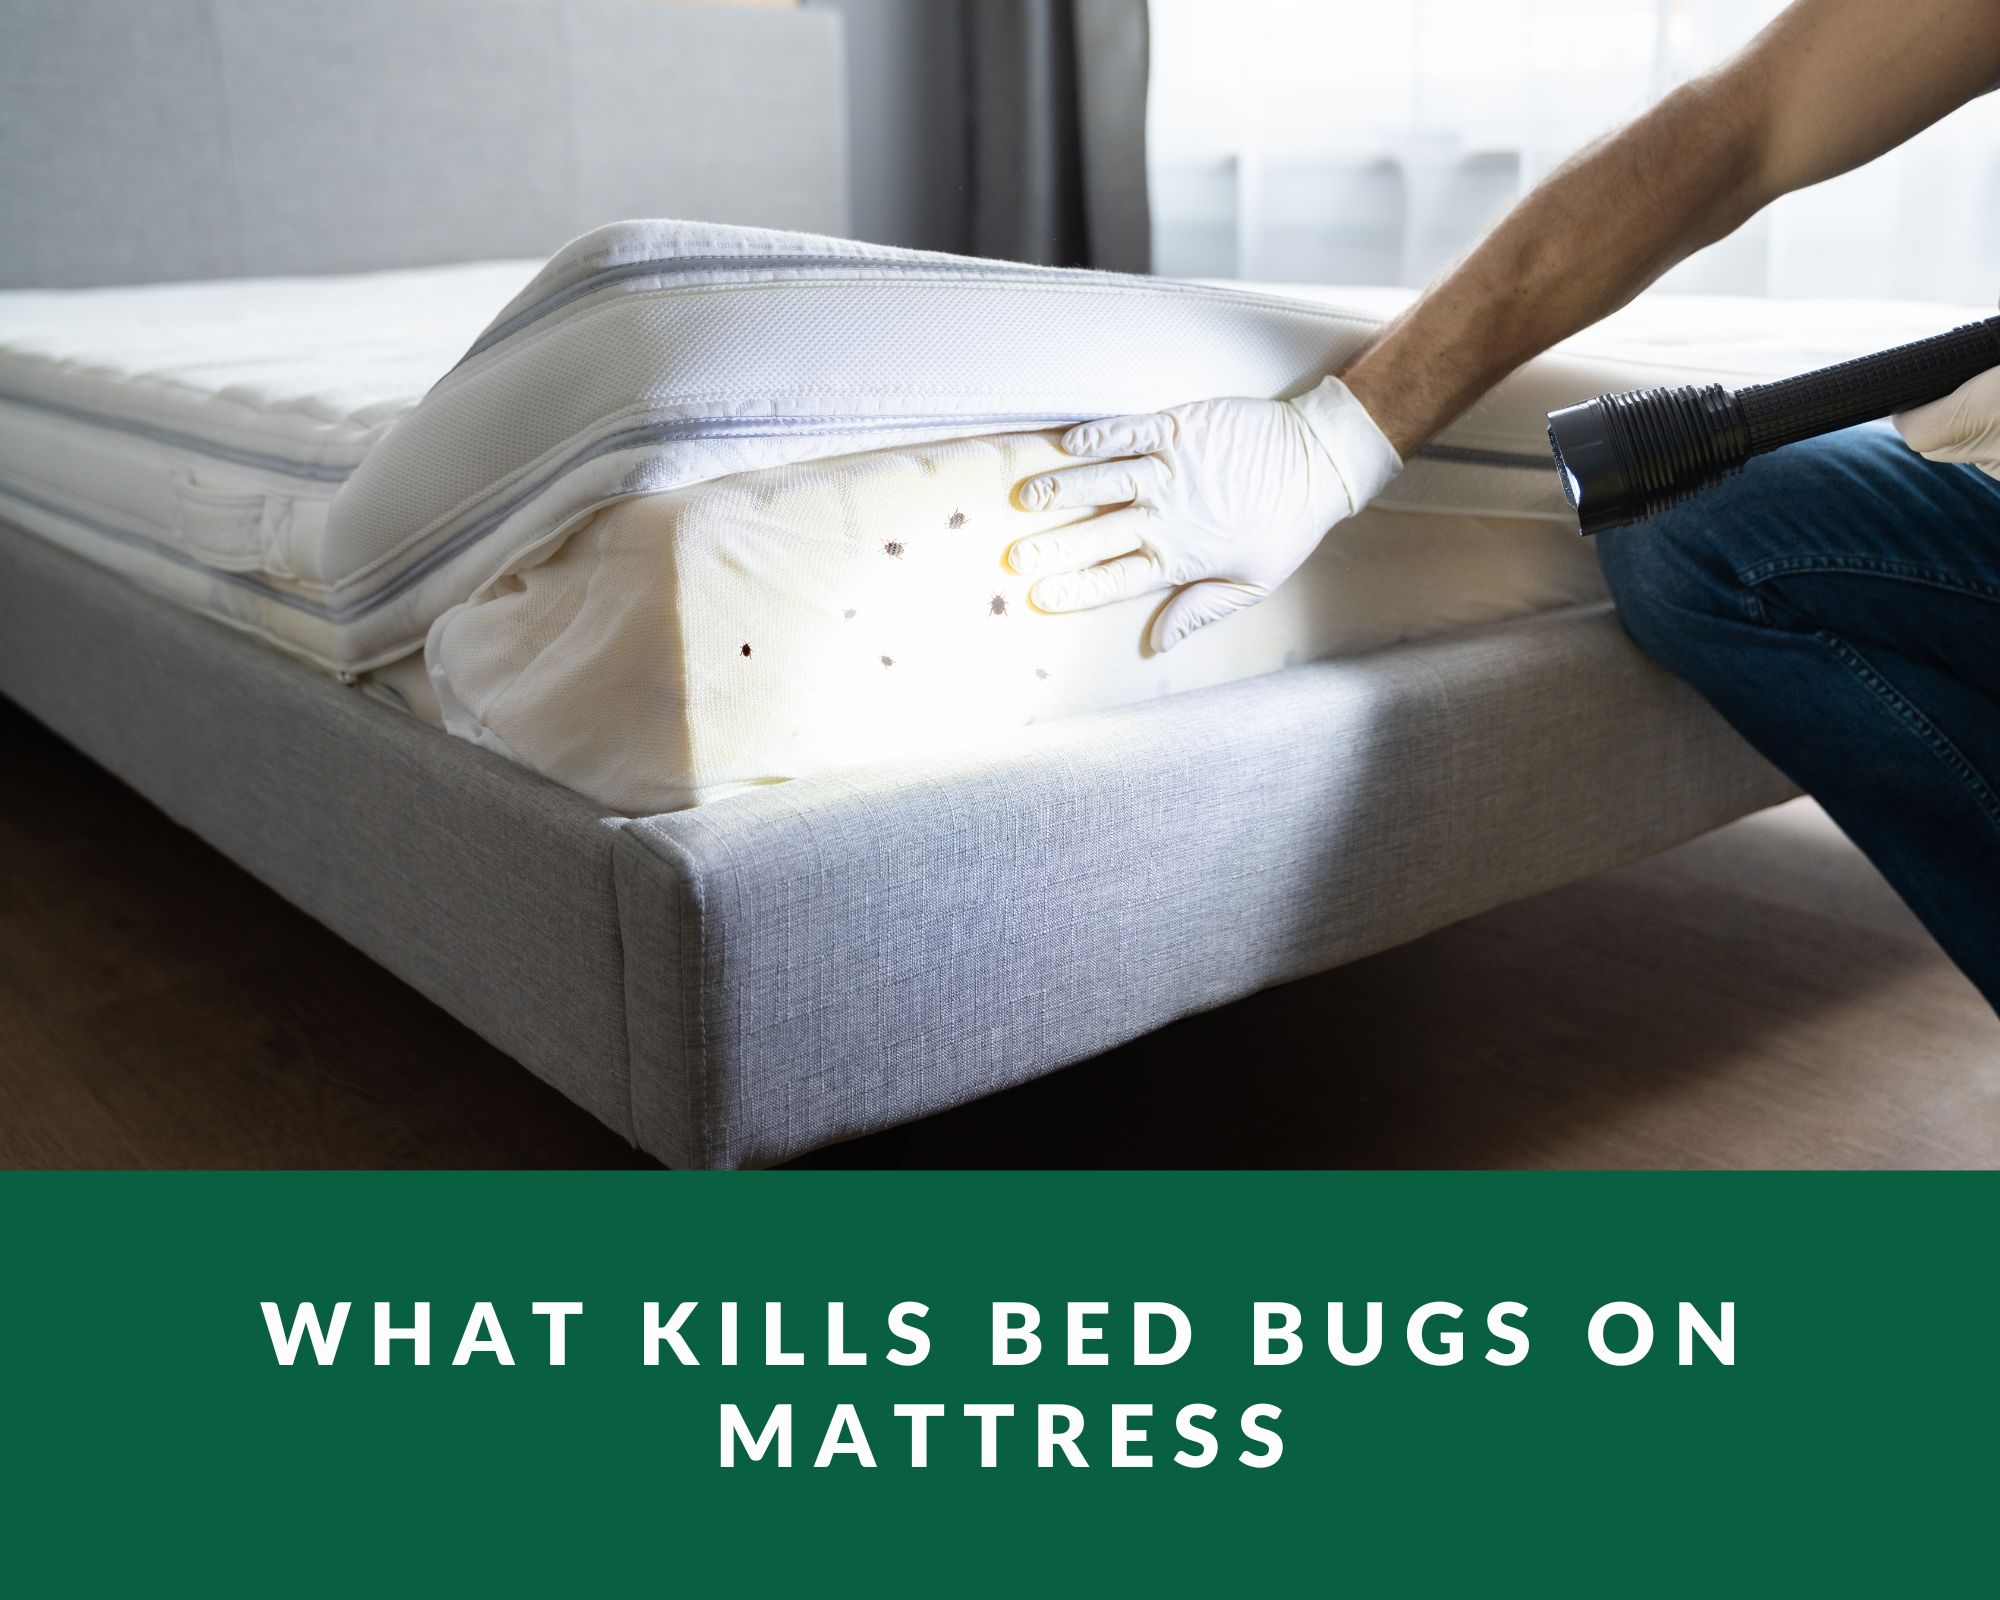 What Kills Bed Bugs on Mattress